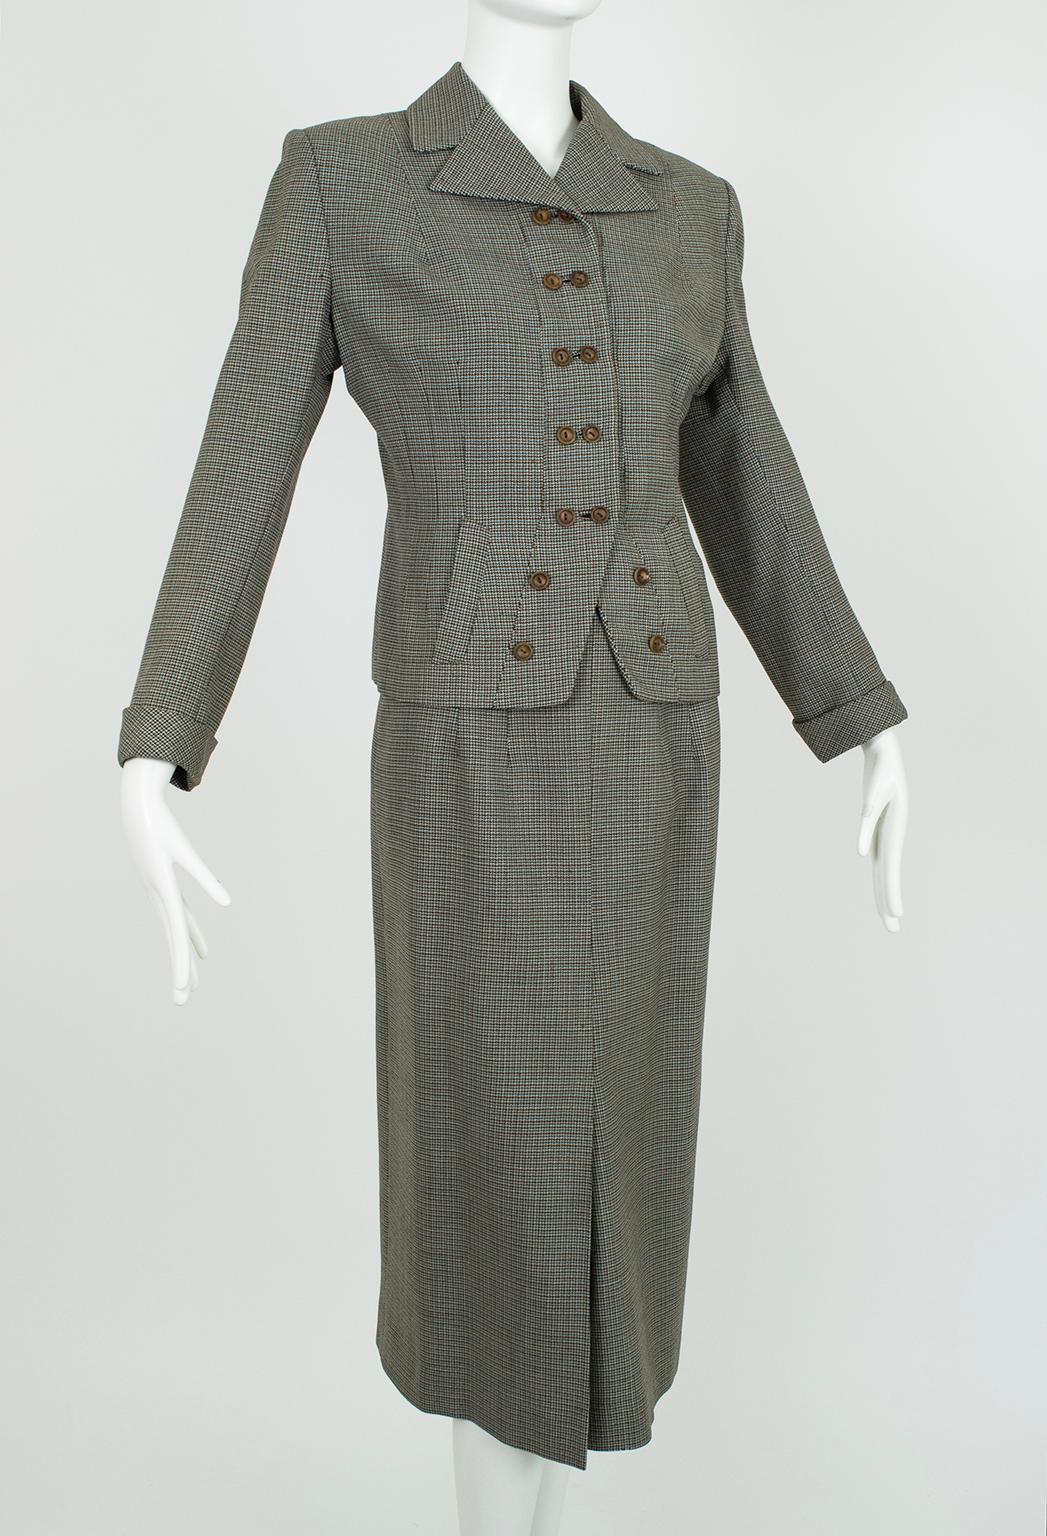 A wartime Girl Friday suit with style to spare despite its adherence to clothing rations. The punchy double-button jacket detail is emblematic of the creative use of everyday materials at a time when flashy dressing was considered unpatriotic.